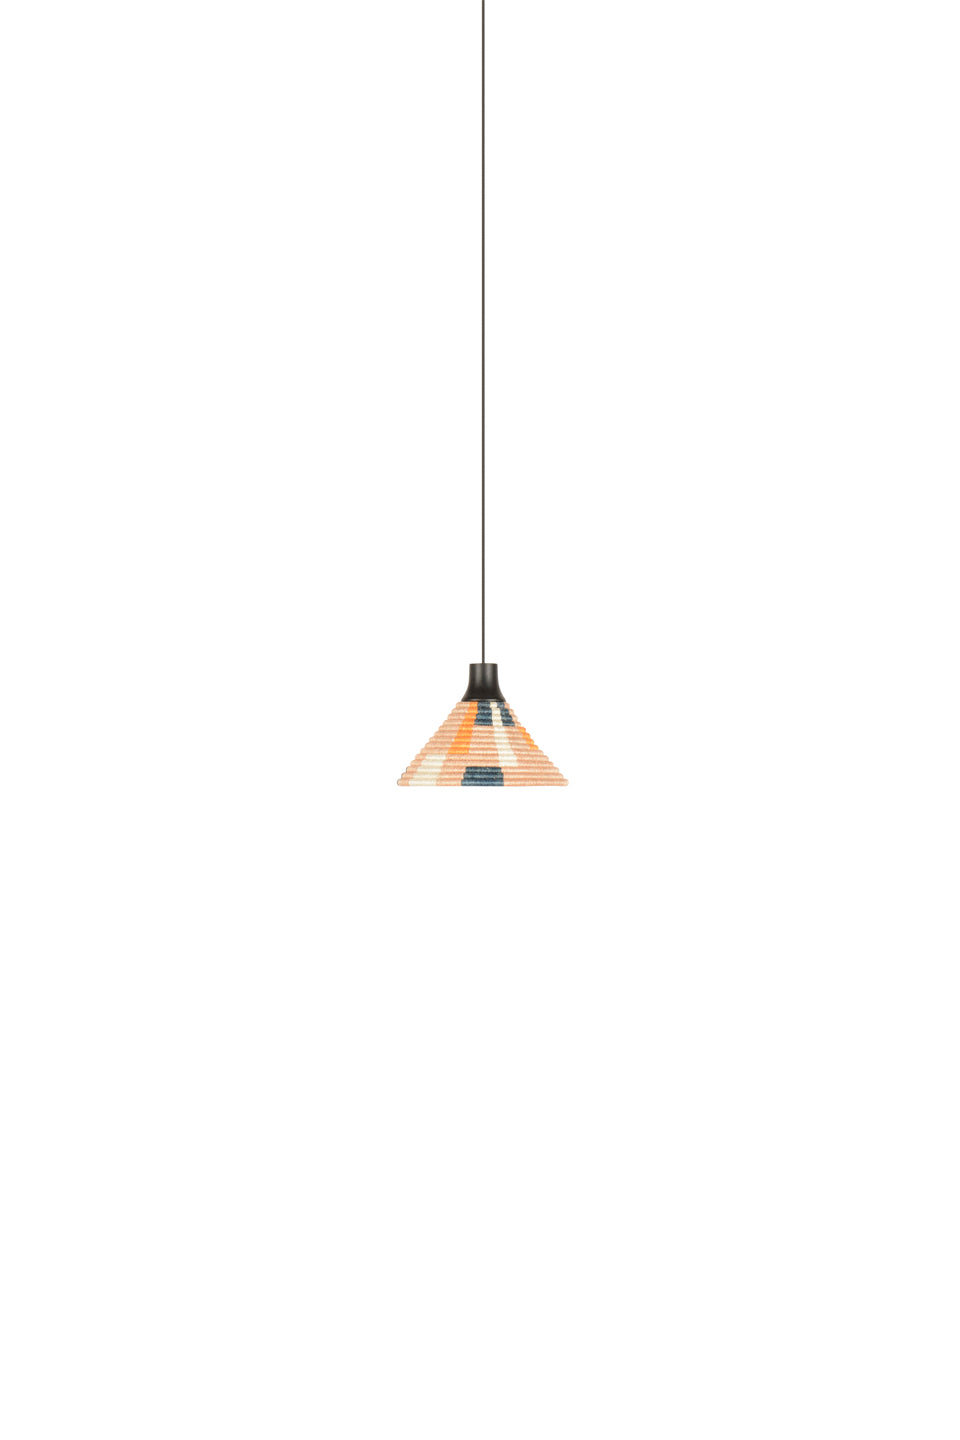 Parrot X-Small Pendant Light by Forestier